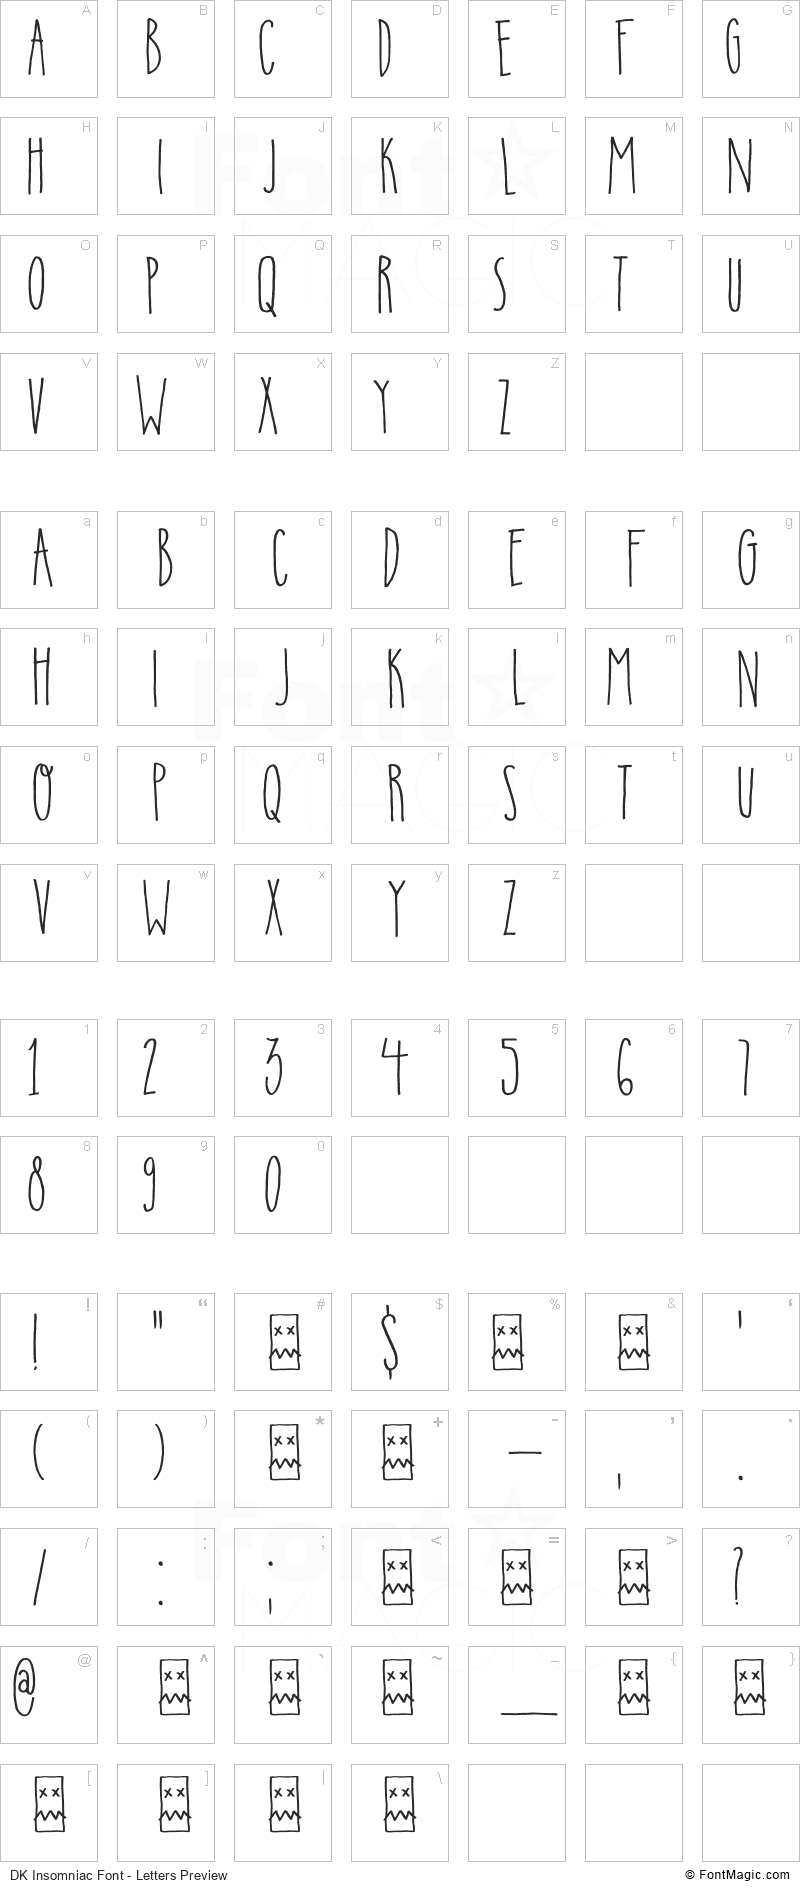 DK Insomniac Font - All Latters Preview Chart